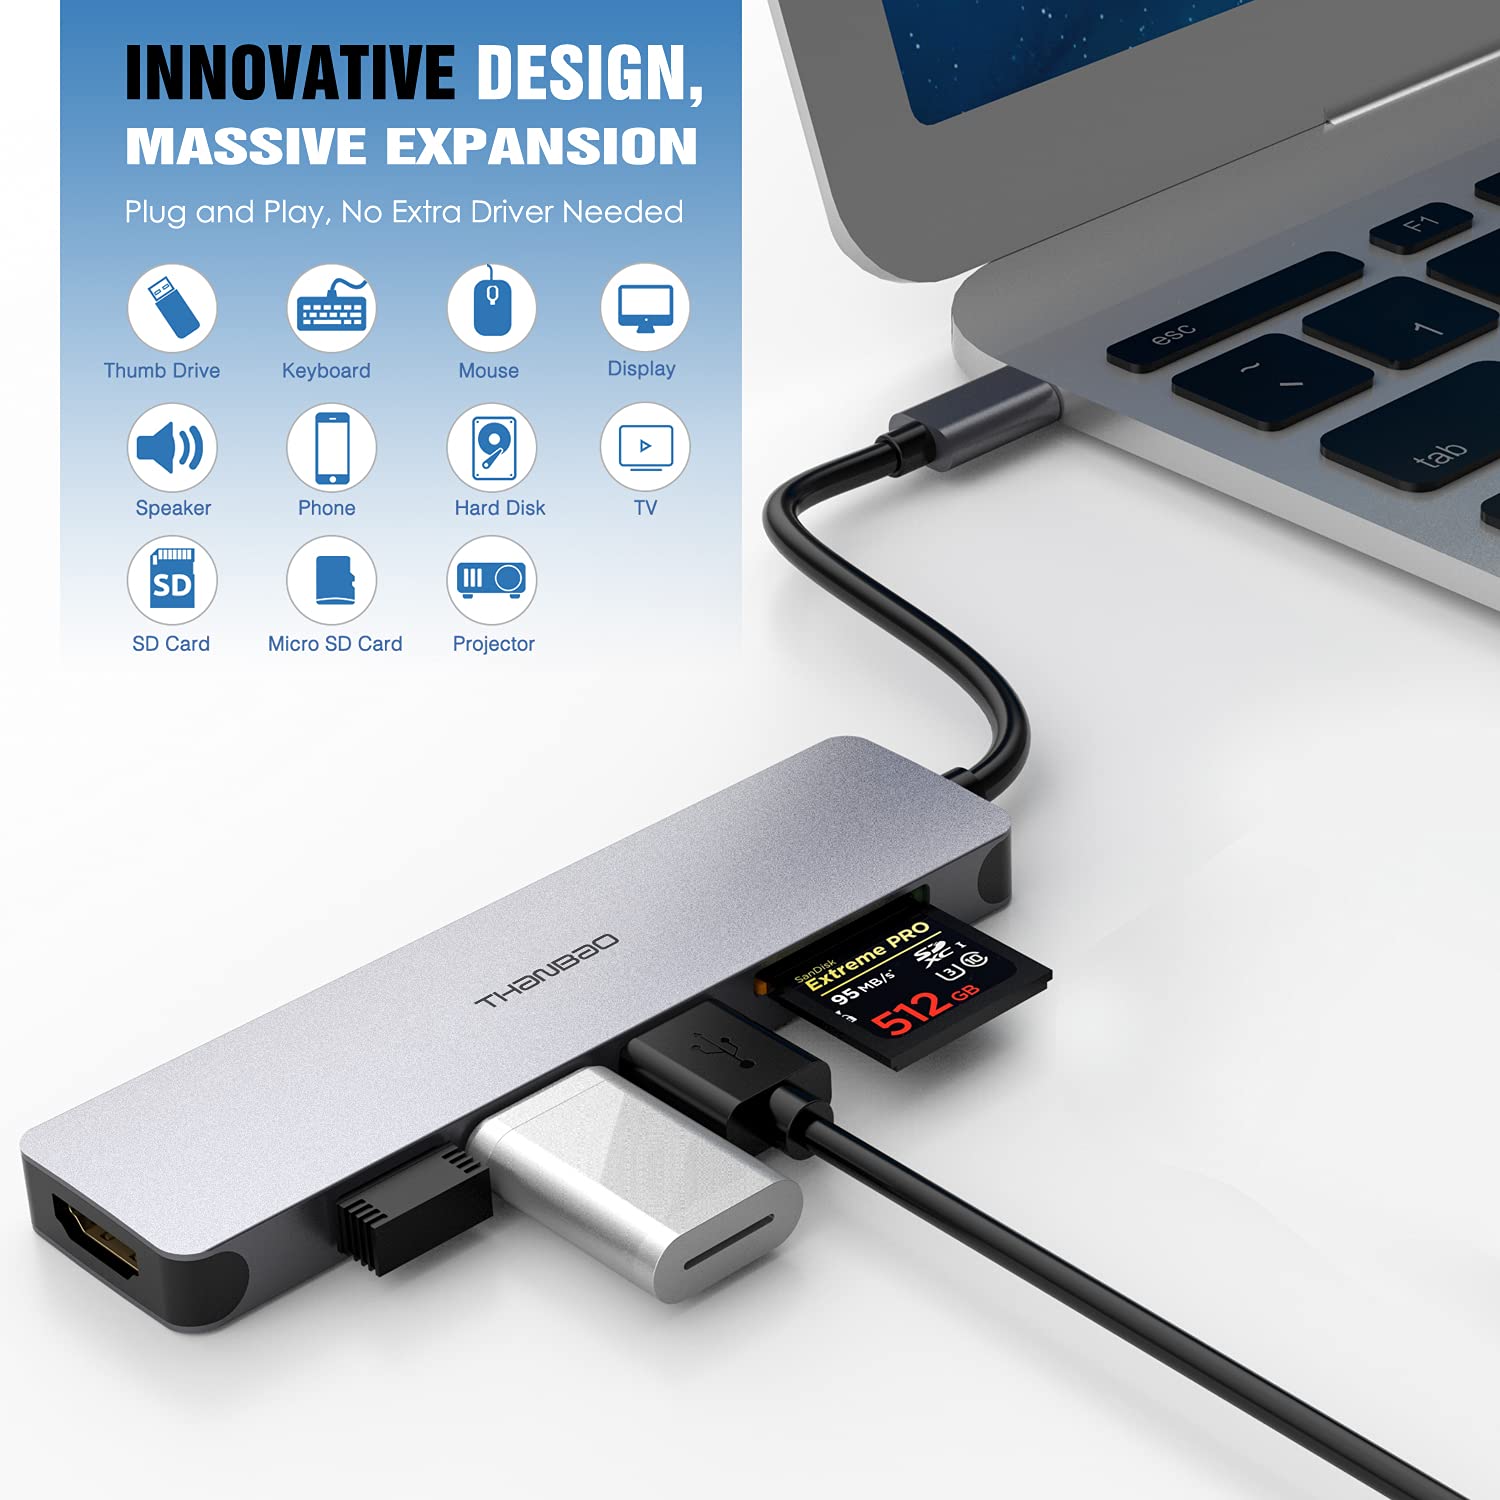 USB C Hub Multiport Adapter - 7 in 1 Portable Space Aluminum Dongle with 4K HDMI Output, 3 USB 3.0 Ports, SD/TF Card Reader Compatible for MacBook Pro, XPS More Type C Devices